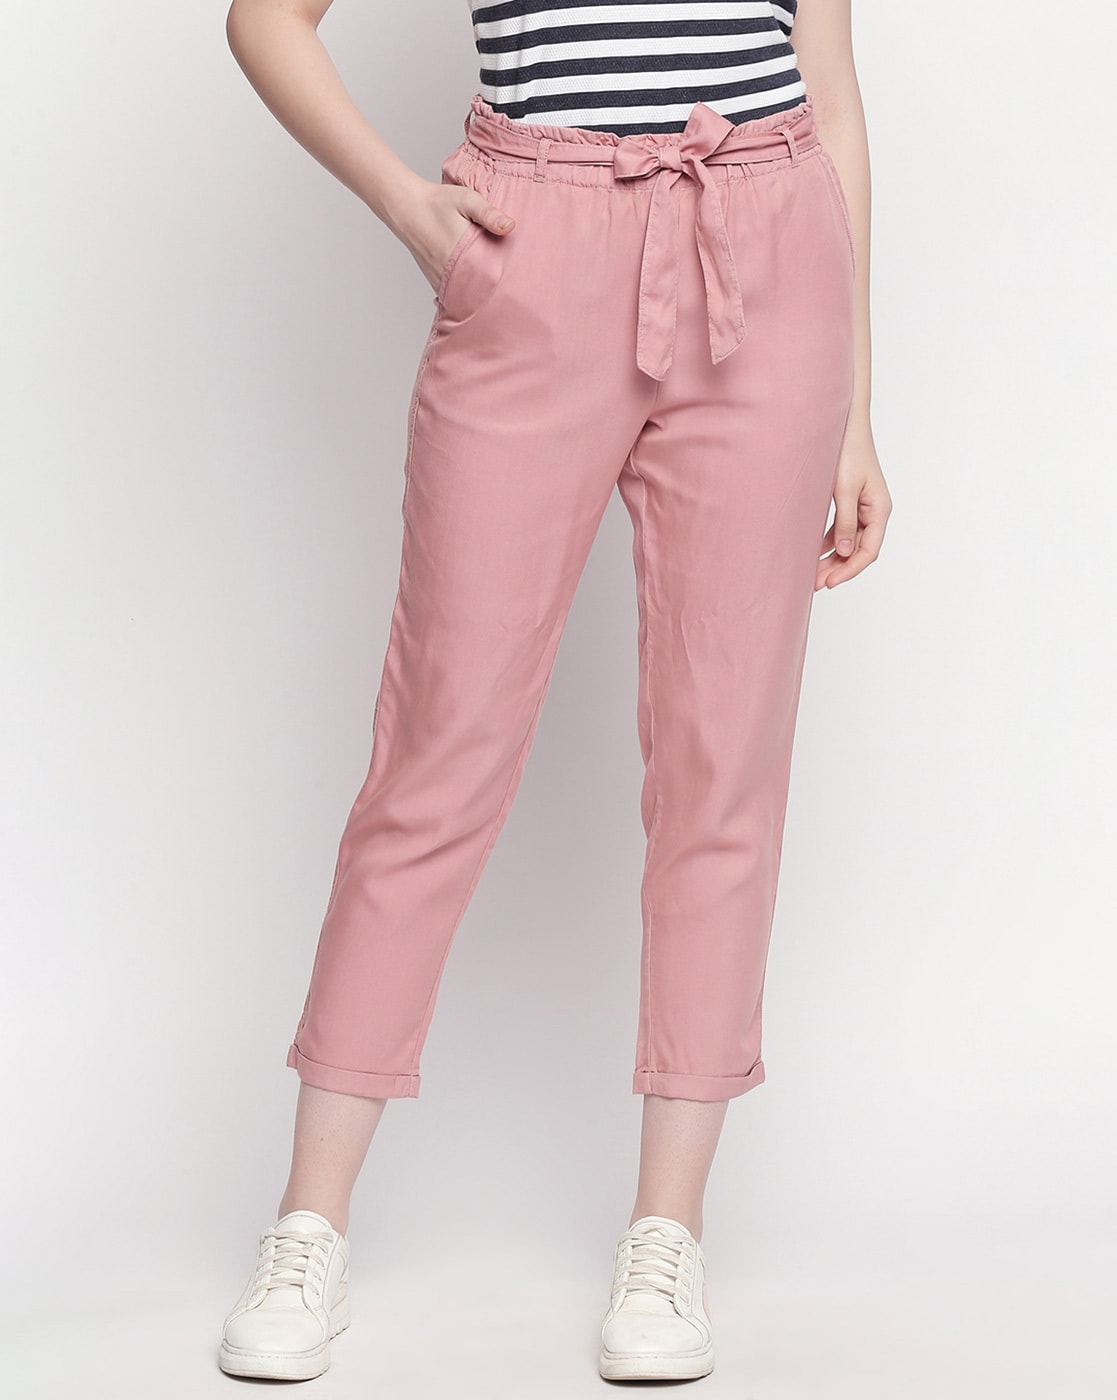 Honey Black Solid AnkleLength Casual Women Comfort Fit Trousers  Selling  Fast at Pantaloonscom